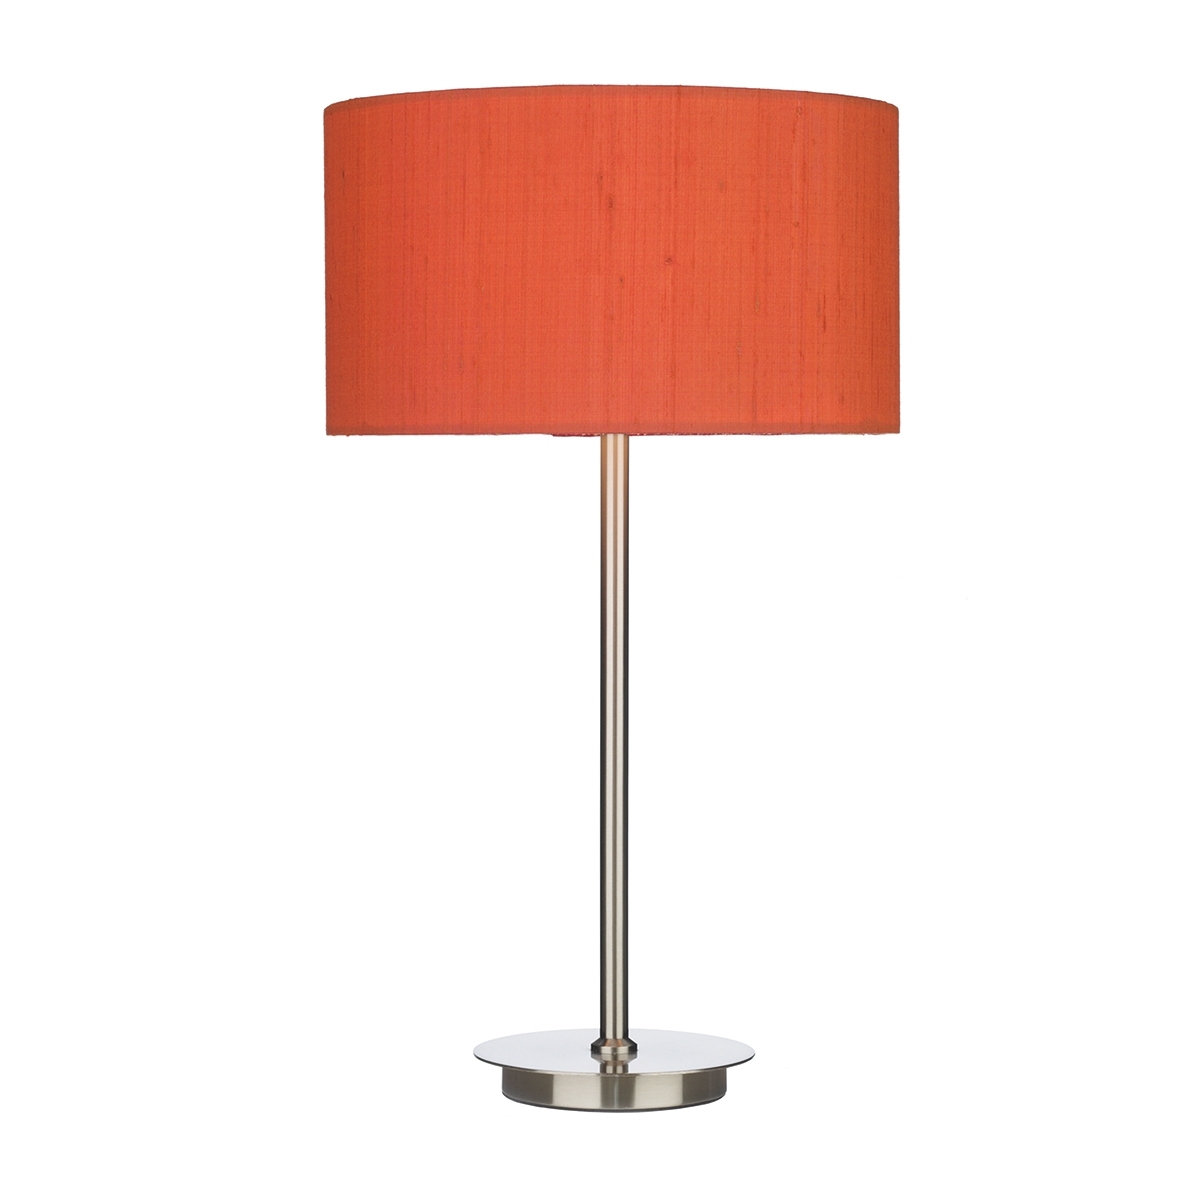 Home table lamps tuscan table lamp in satin chrome